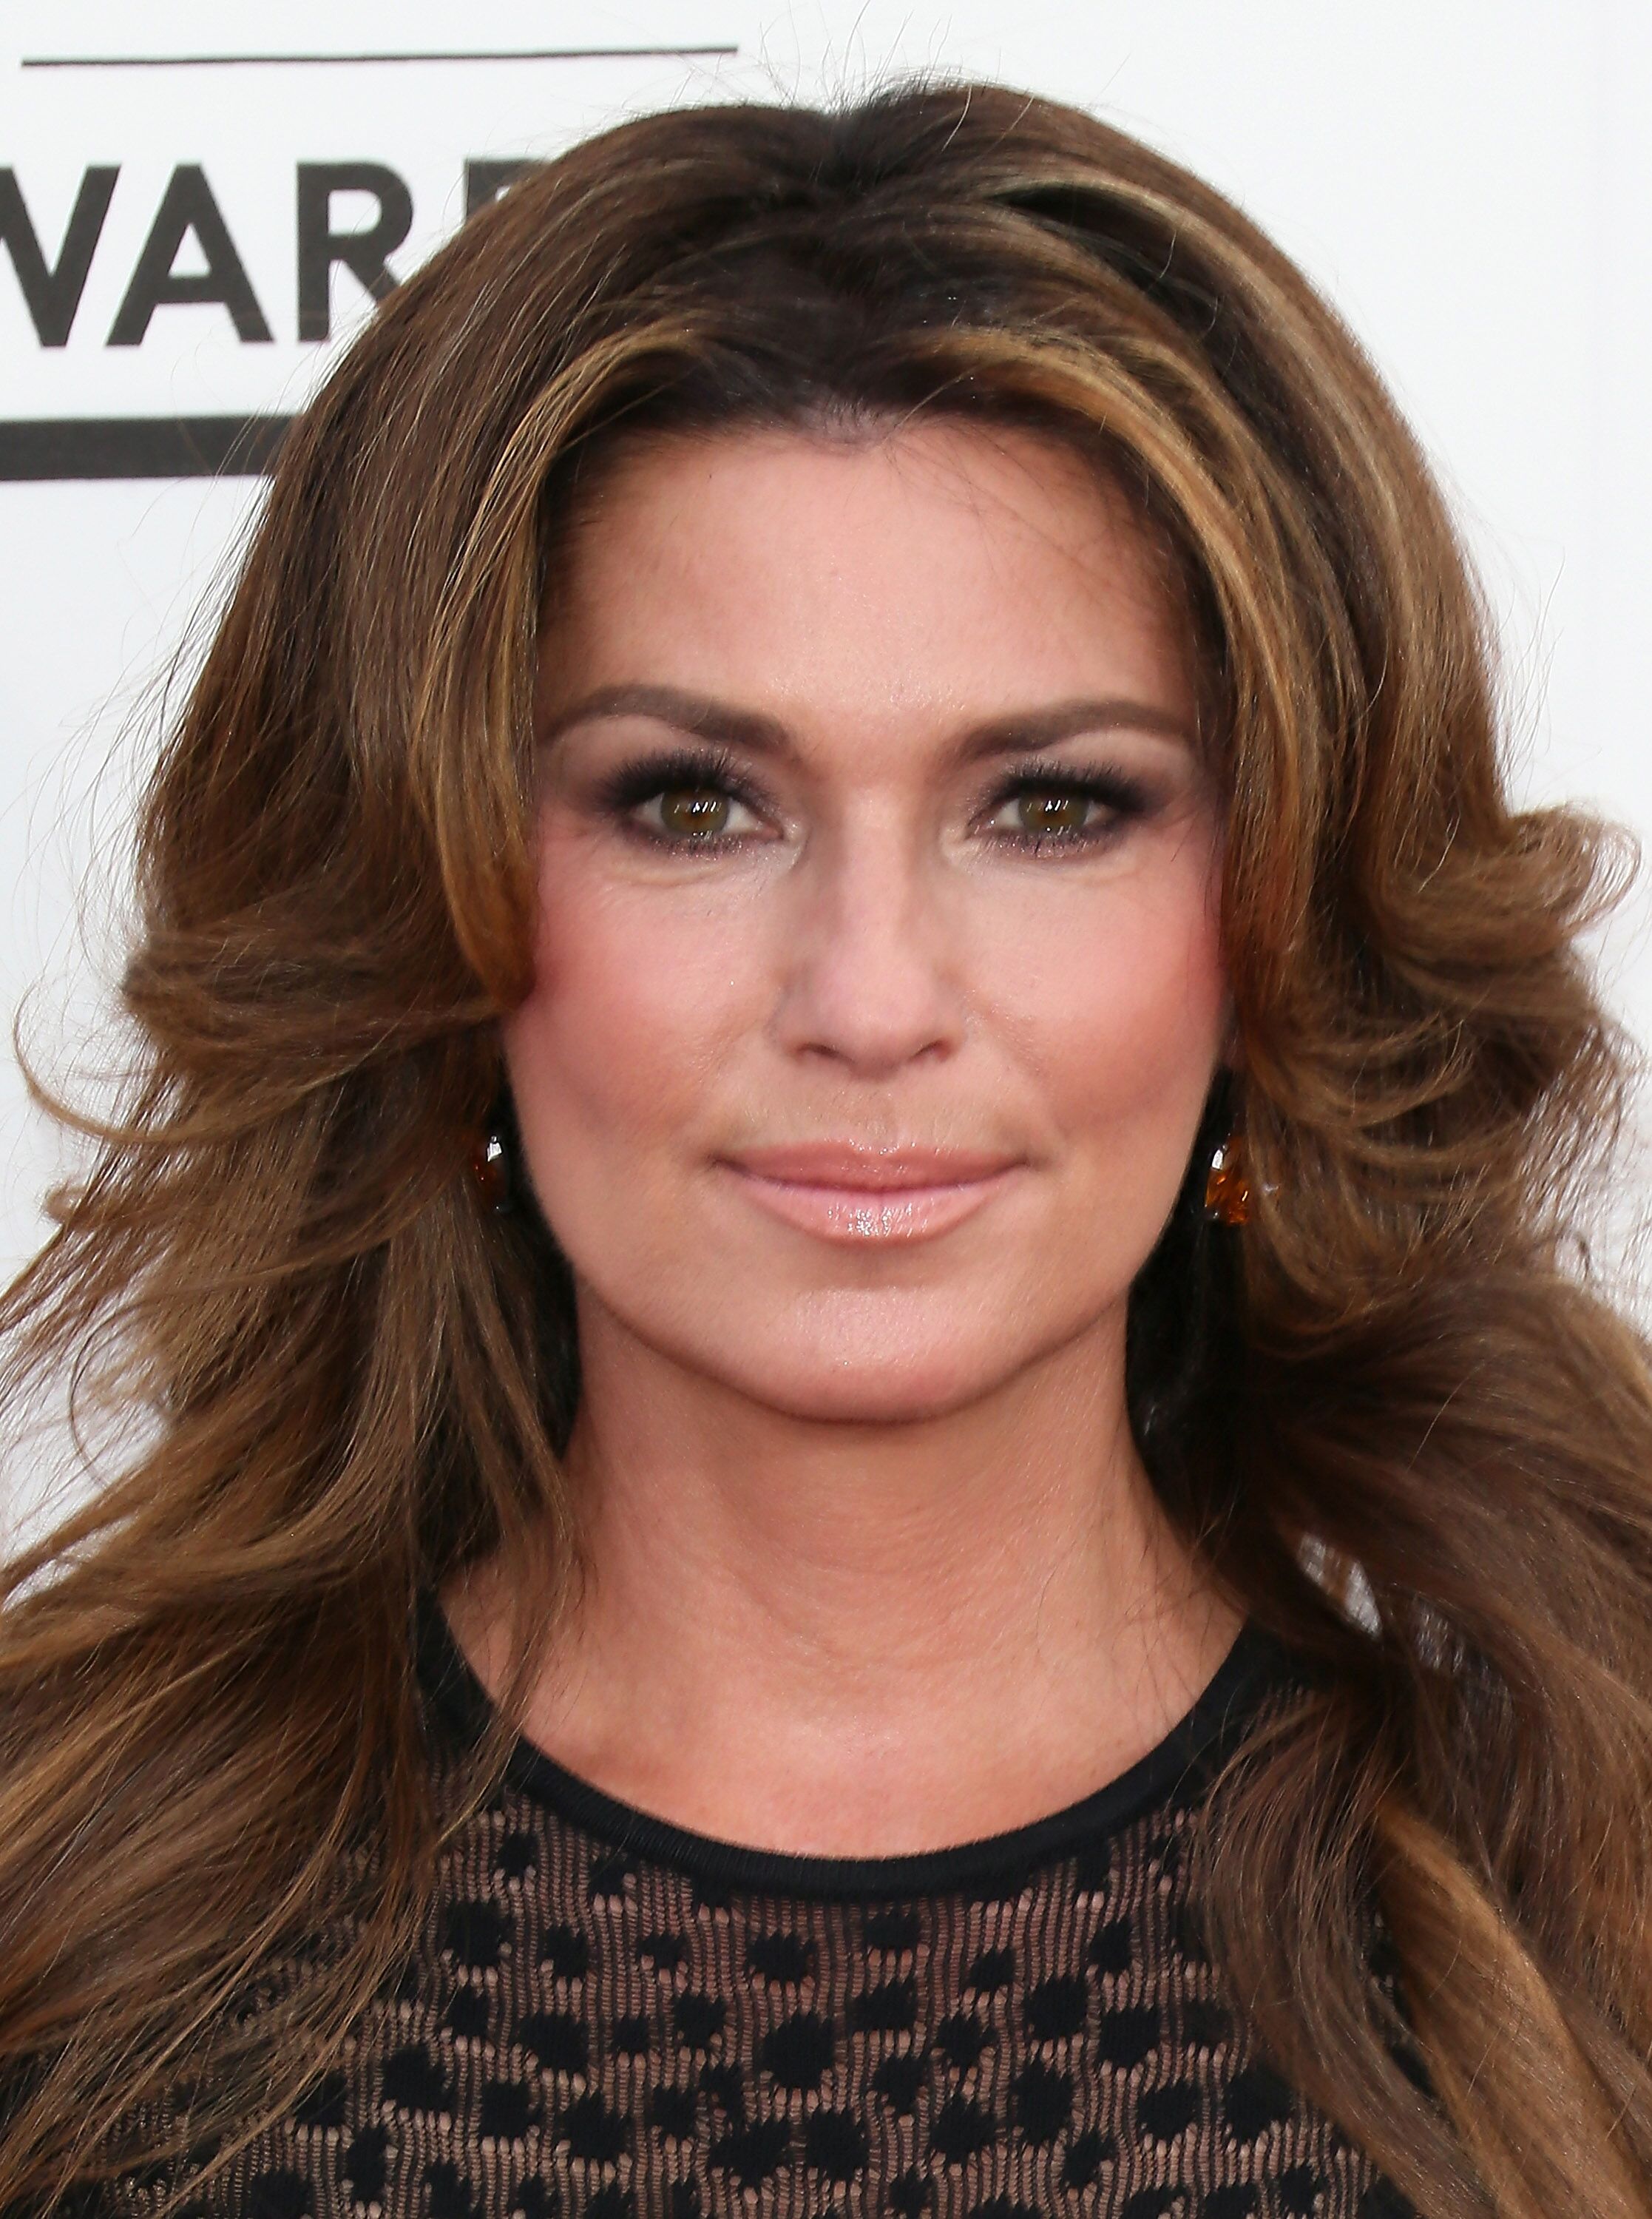 Shania Twain attends the 2014 Billboard Music Awards at the MGM Grand Garden Arena on May 18, 2014 in Las Vegas, Nevada. | Photo: Getty Images